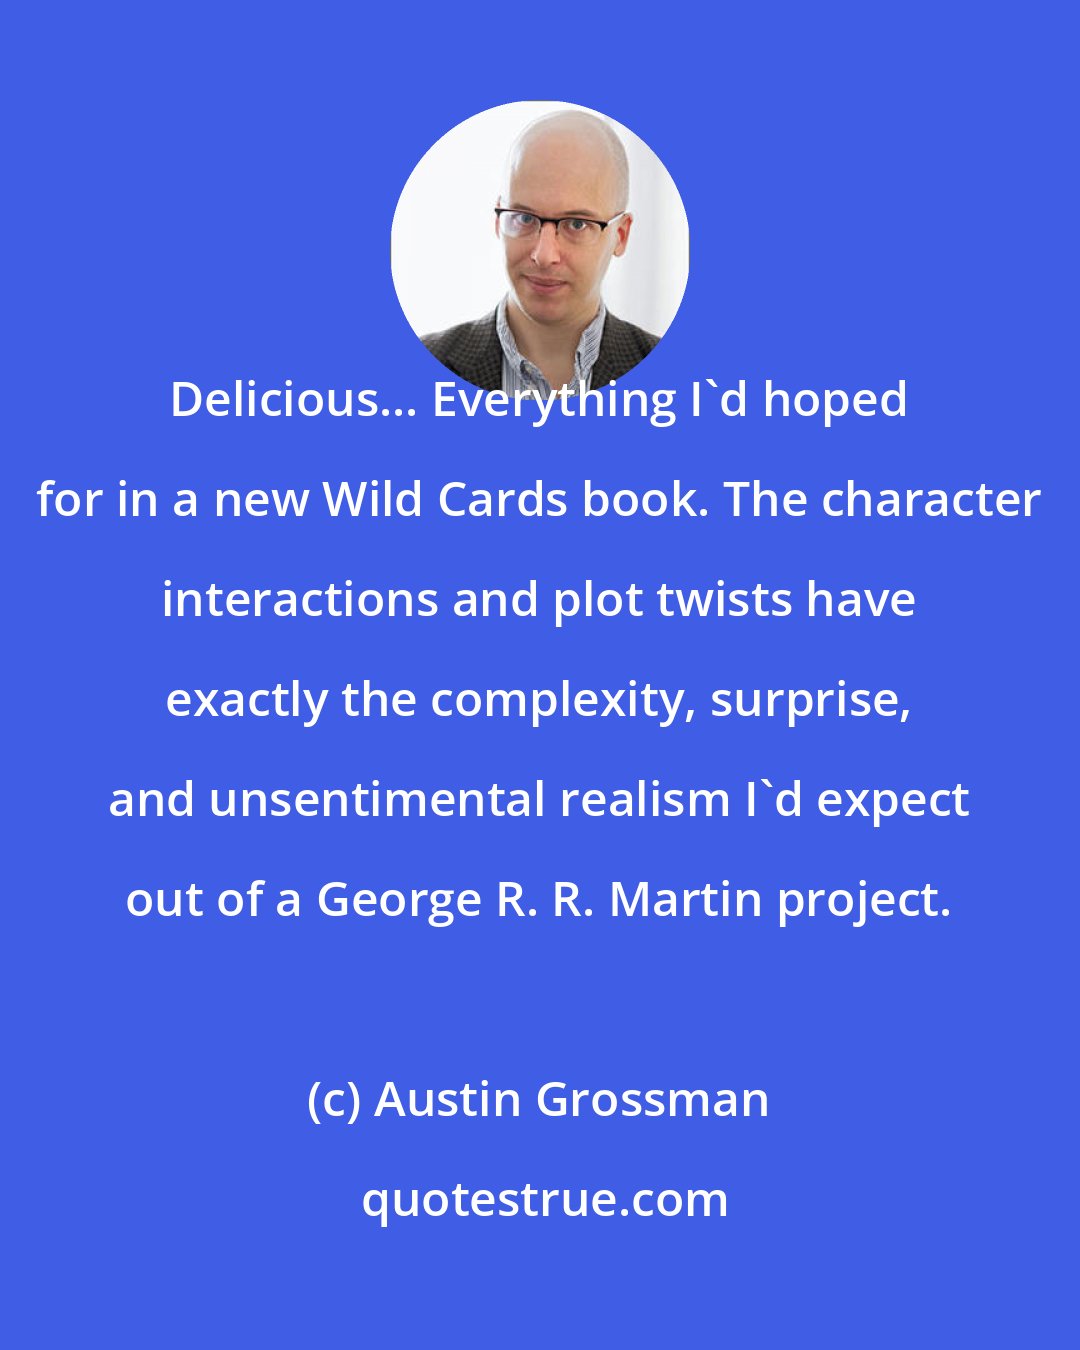 Austin Grossman: Delicious... Everything I'd hoped for in a new Wild Cards book. The character interactions and plot twists have exactly the complexity, surprise, and unsentimental realism I'd expect out of a George R. R. Martin project.